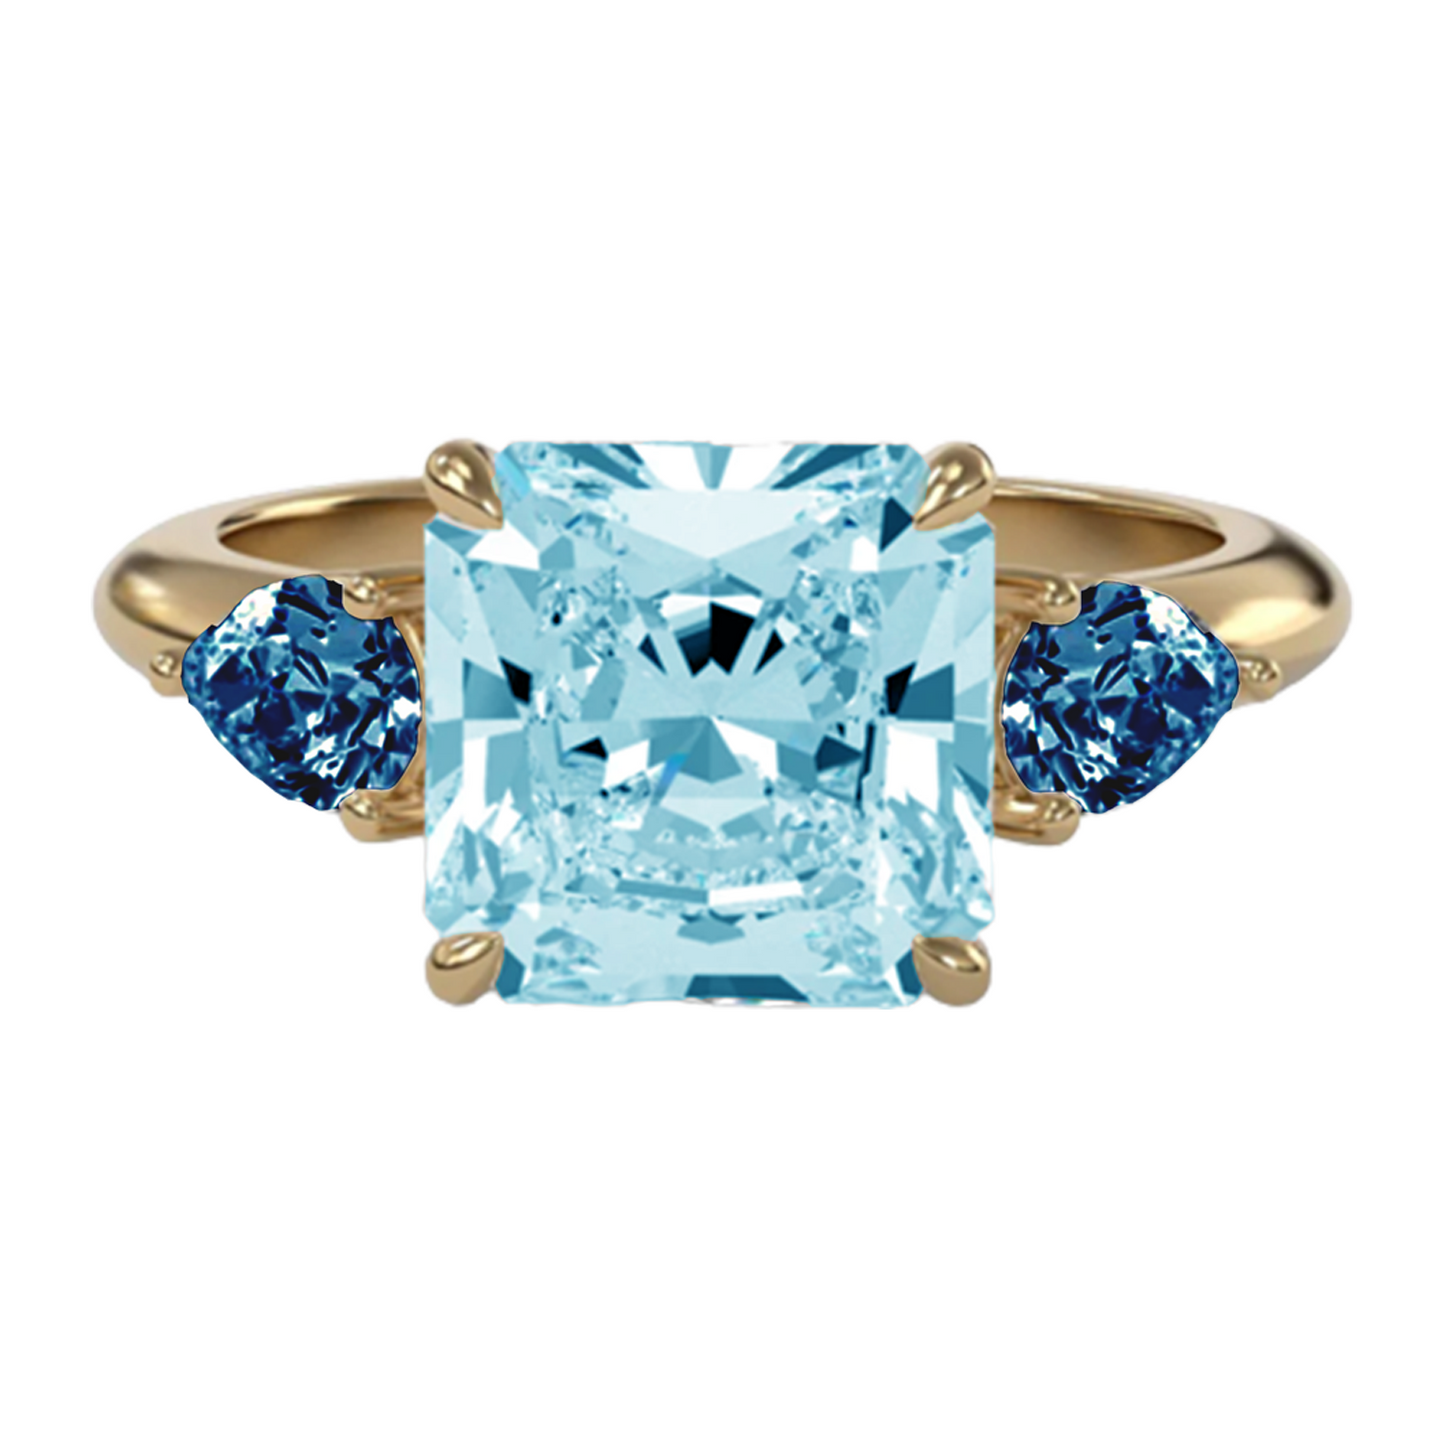 Luxury gemstone jewellery piece, the Sky Blue Topaz and Pear Teal Topaz Ring with 18ct Yellow Gold plated Sterling Silver band – Gstaad Collection, Augustine Jewellery, Luxury Jewellery London.